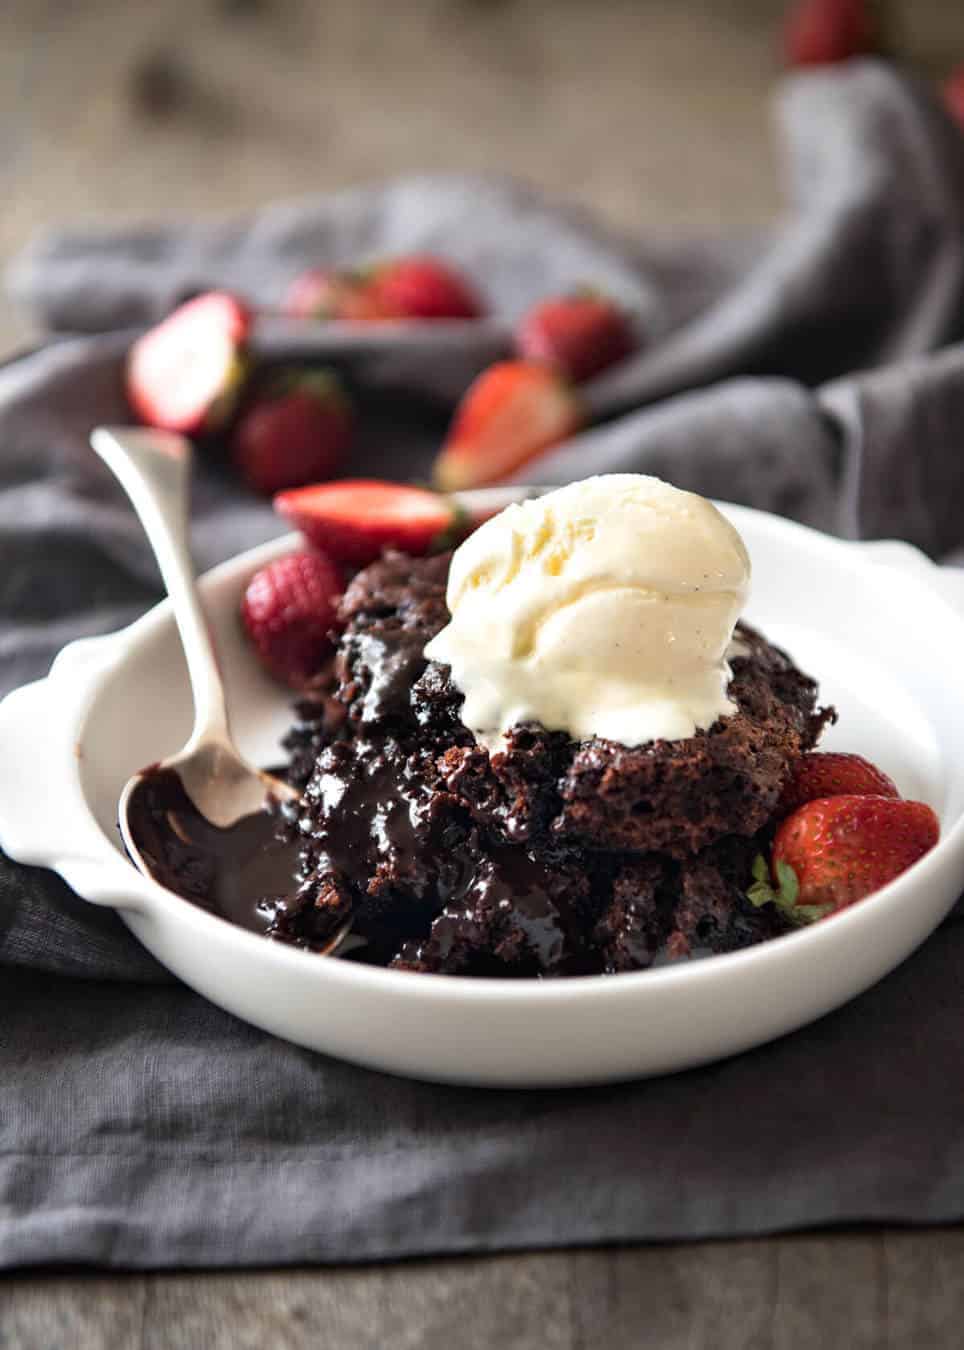 Chocolate Self Saucing Pudding - 1 batter transforms into a moist chocolate cake with a beautiful silky chocolate sauce! 10 minutes active effort. www.recipetineats.com